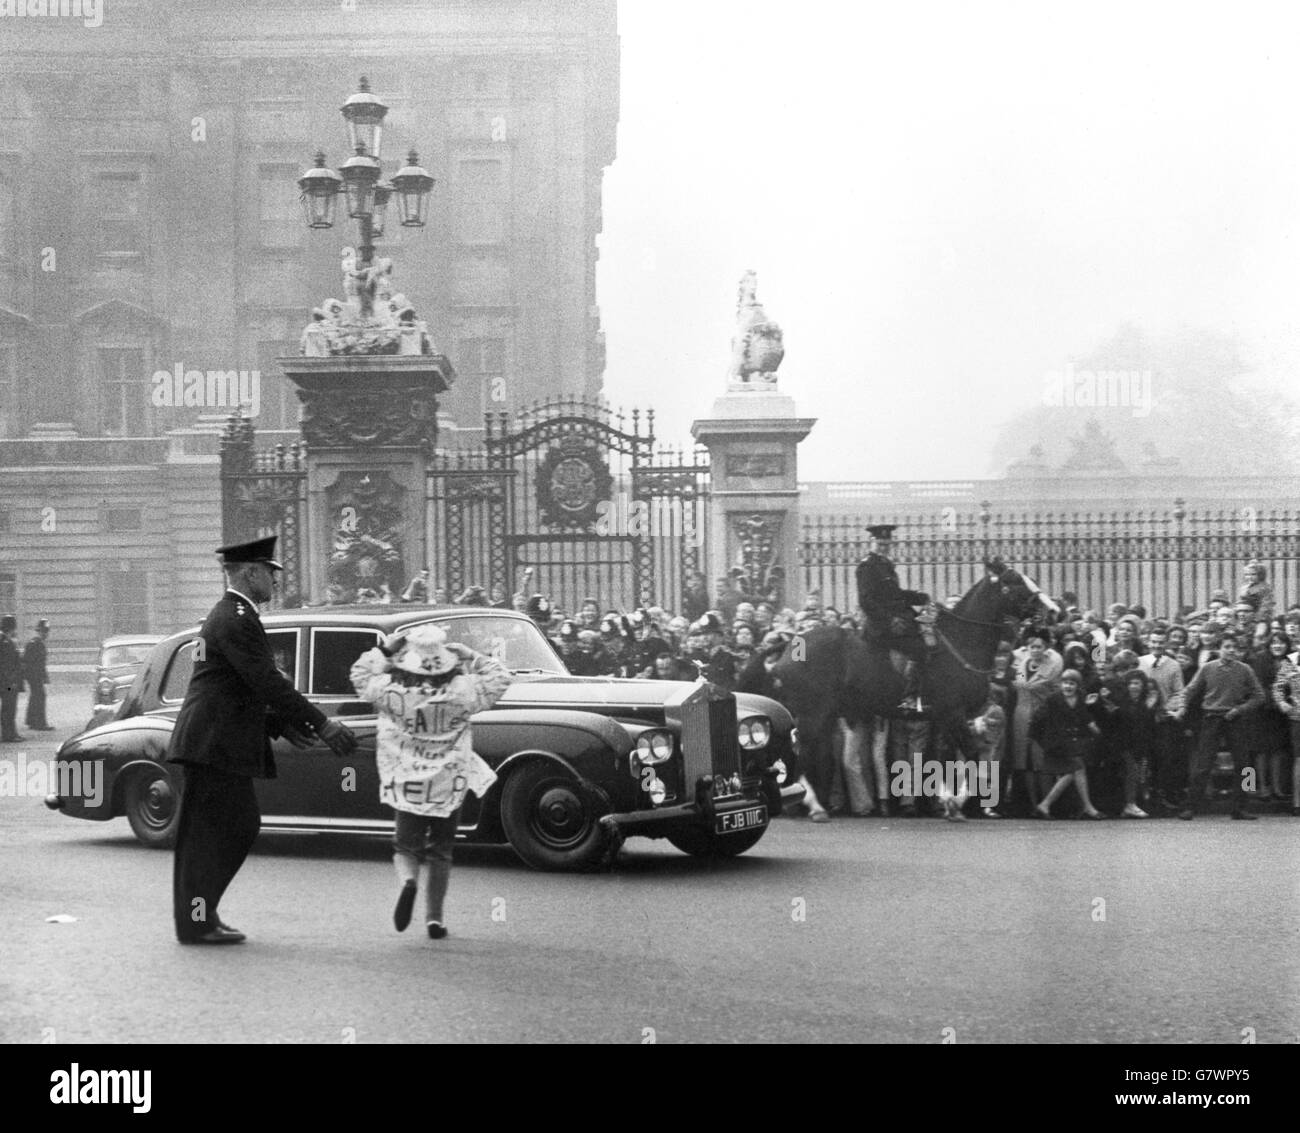 A police officer tries to stop a girl fan making a break for the Beatles' Rolls-Royce as the group leave Buckingham Palace after attending the Investiture. In the background, a mounted policeman holds back a section of the huge crowd which gave the Beatles a screaming send-off probably unprecedented outside the Palace. The Beatles had received from the Queen their insignia as Members of the Order of the British Empire. Stock Photo